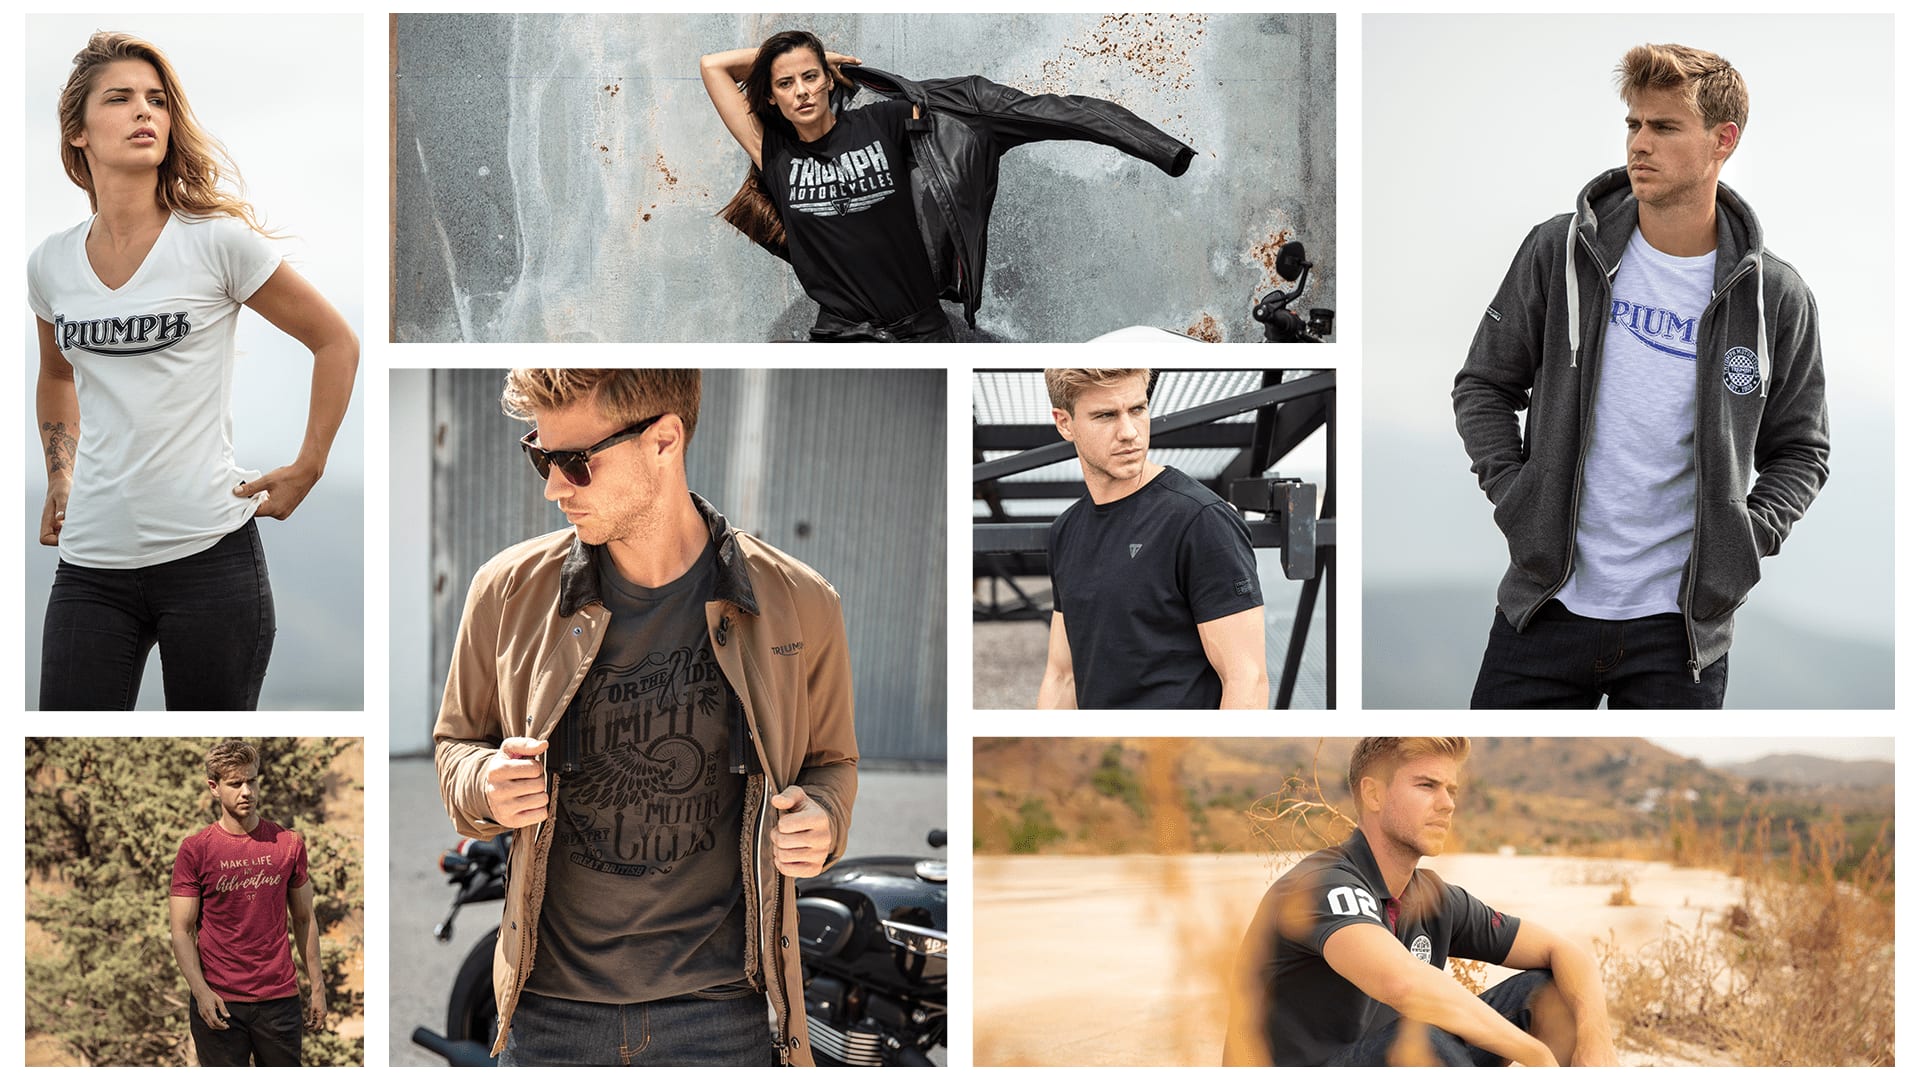 https://media.triumphmotorcycles.co.uk/image/upload/f_auto/q_auto/sitecoremedialibrary/media-library/images/central%20marketing%20team/clothing%20collection/ss19/tshirts-montage-1920x1080-2.png